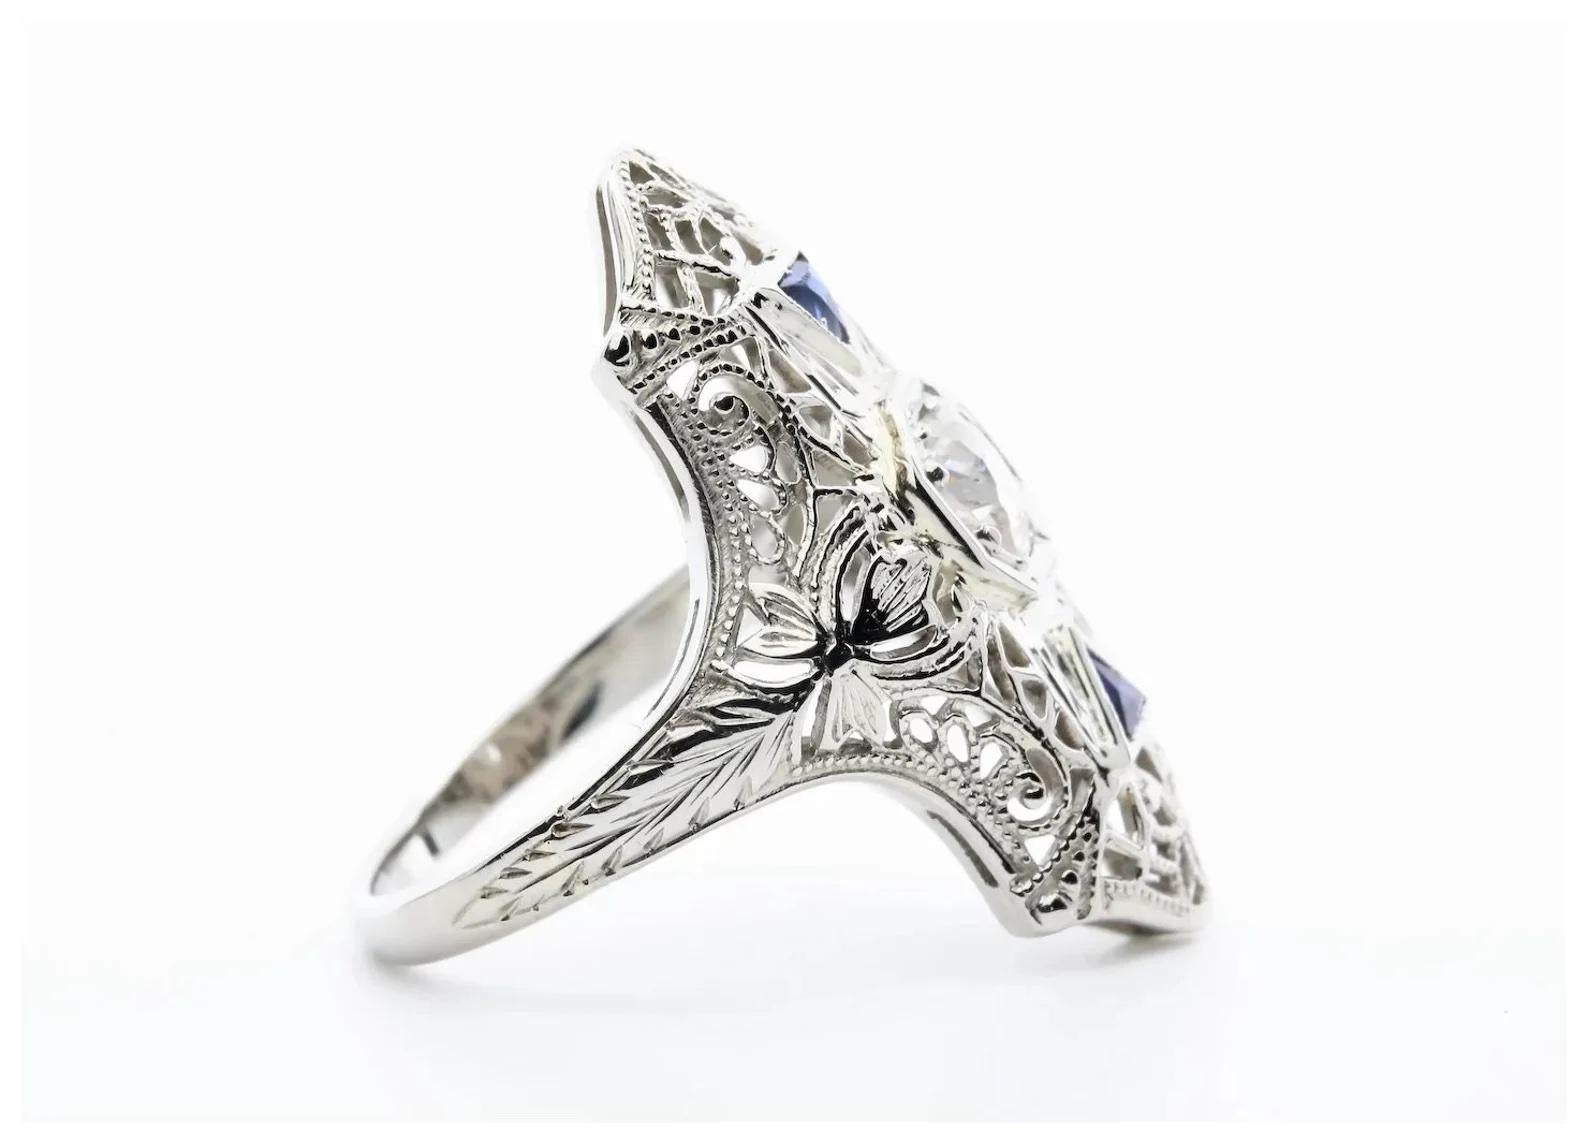 An Art Deco period old European cut diamond, and French cut sapphire cocktail ring. Crafted from 18 karat white gold, this ring features a 0.40 carat H color SI1 clarity old European cut diamond framed by a pair of French cut blue triangular